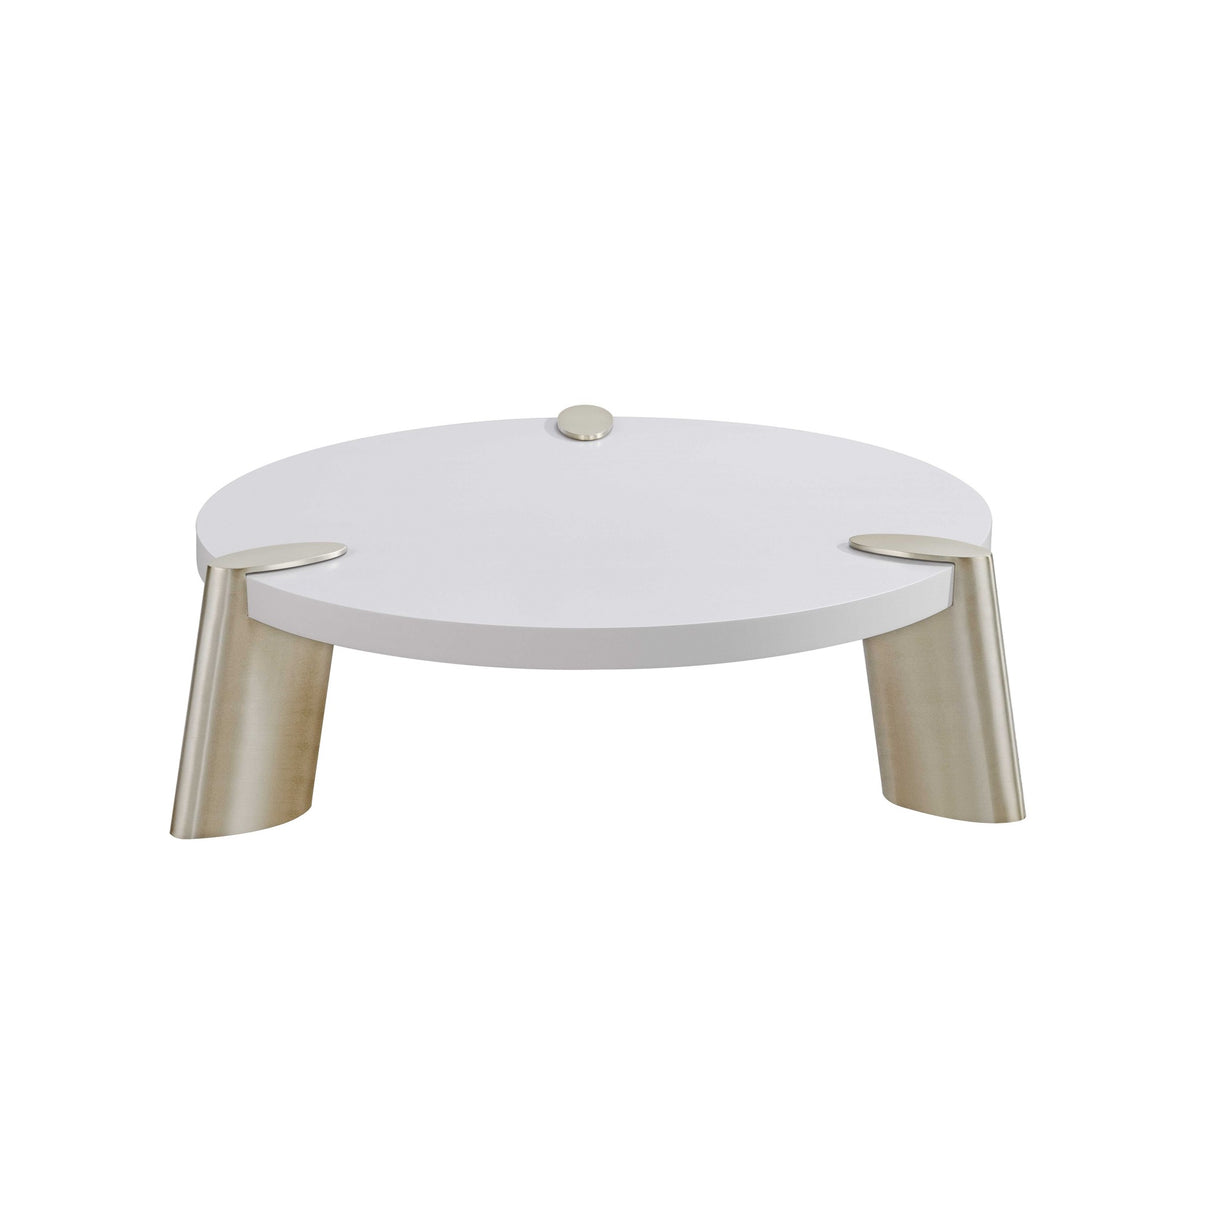 Aden Collection Matte White Finish Coffee Table